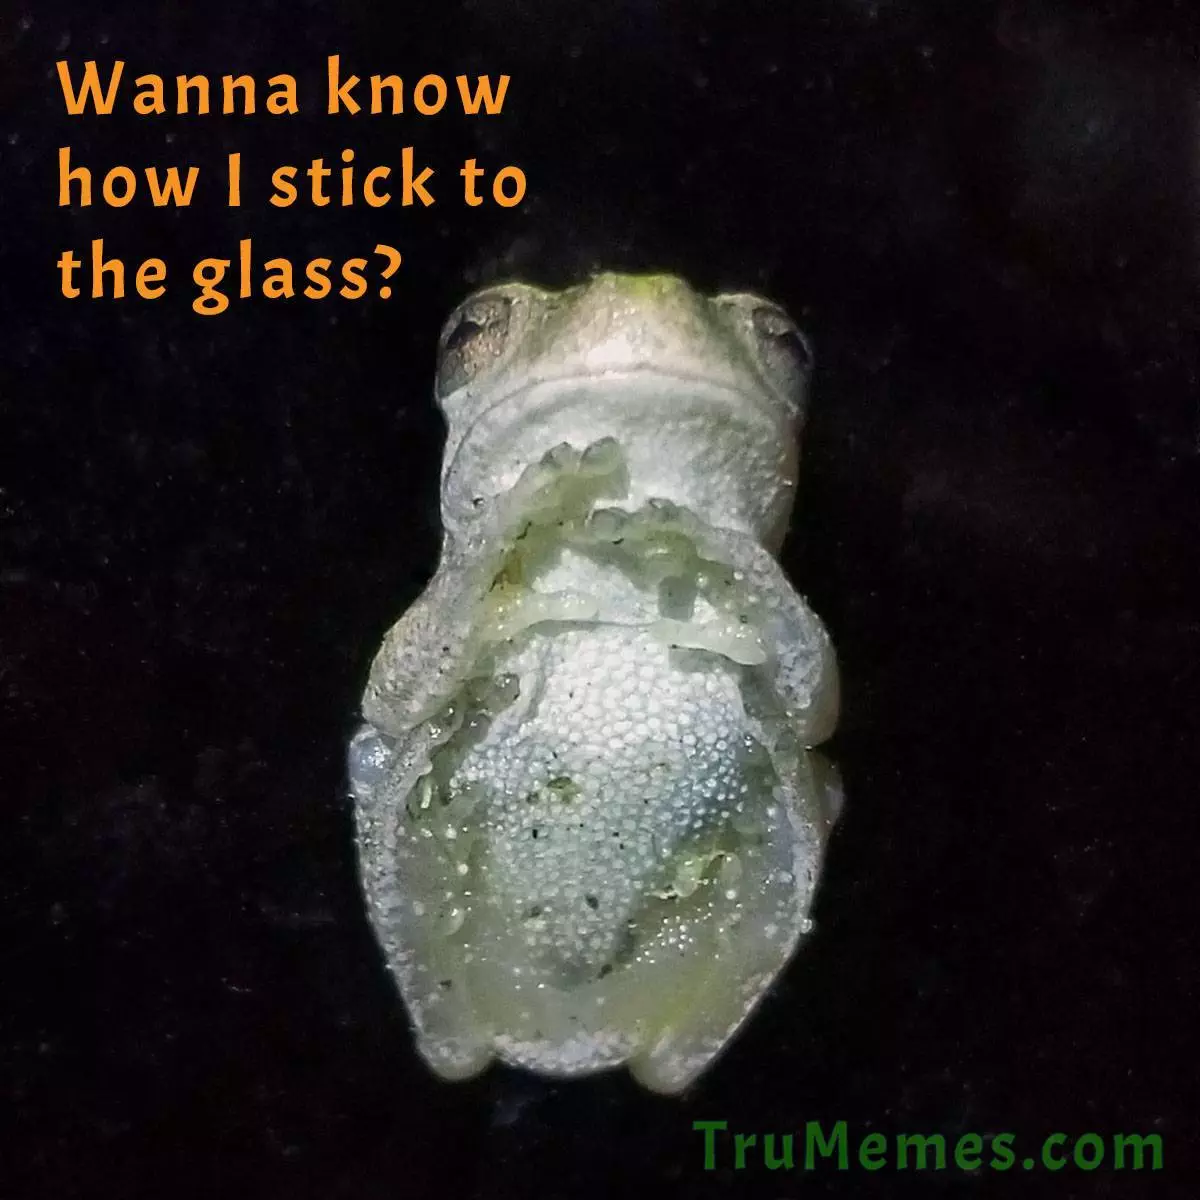 How do small frogs stick to the glass?